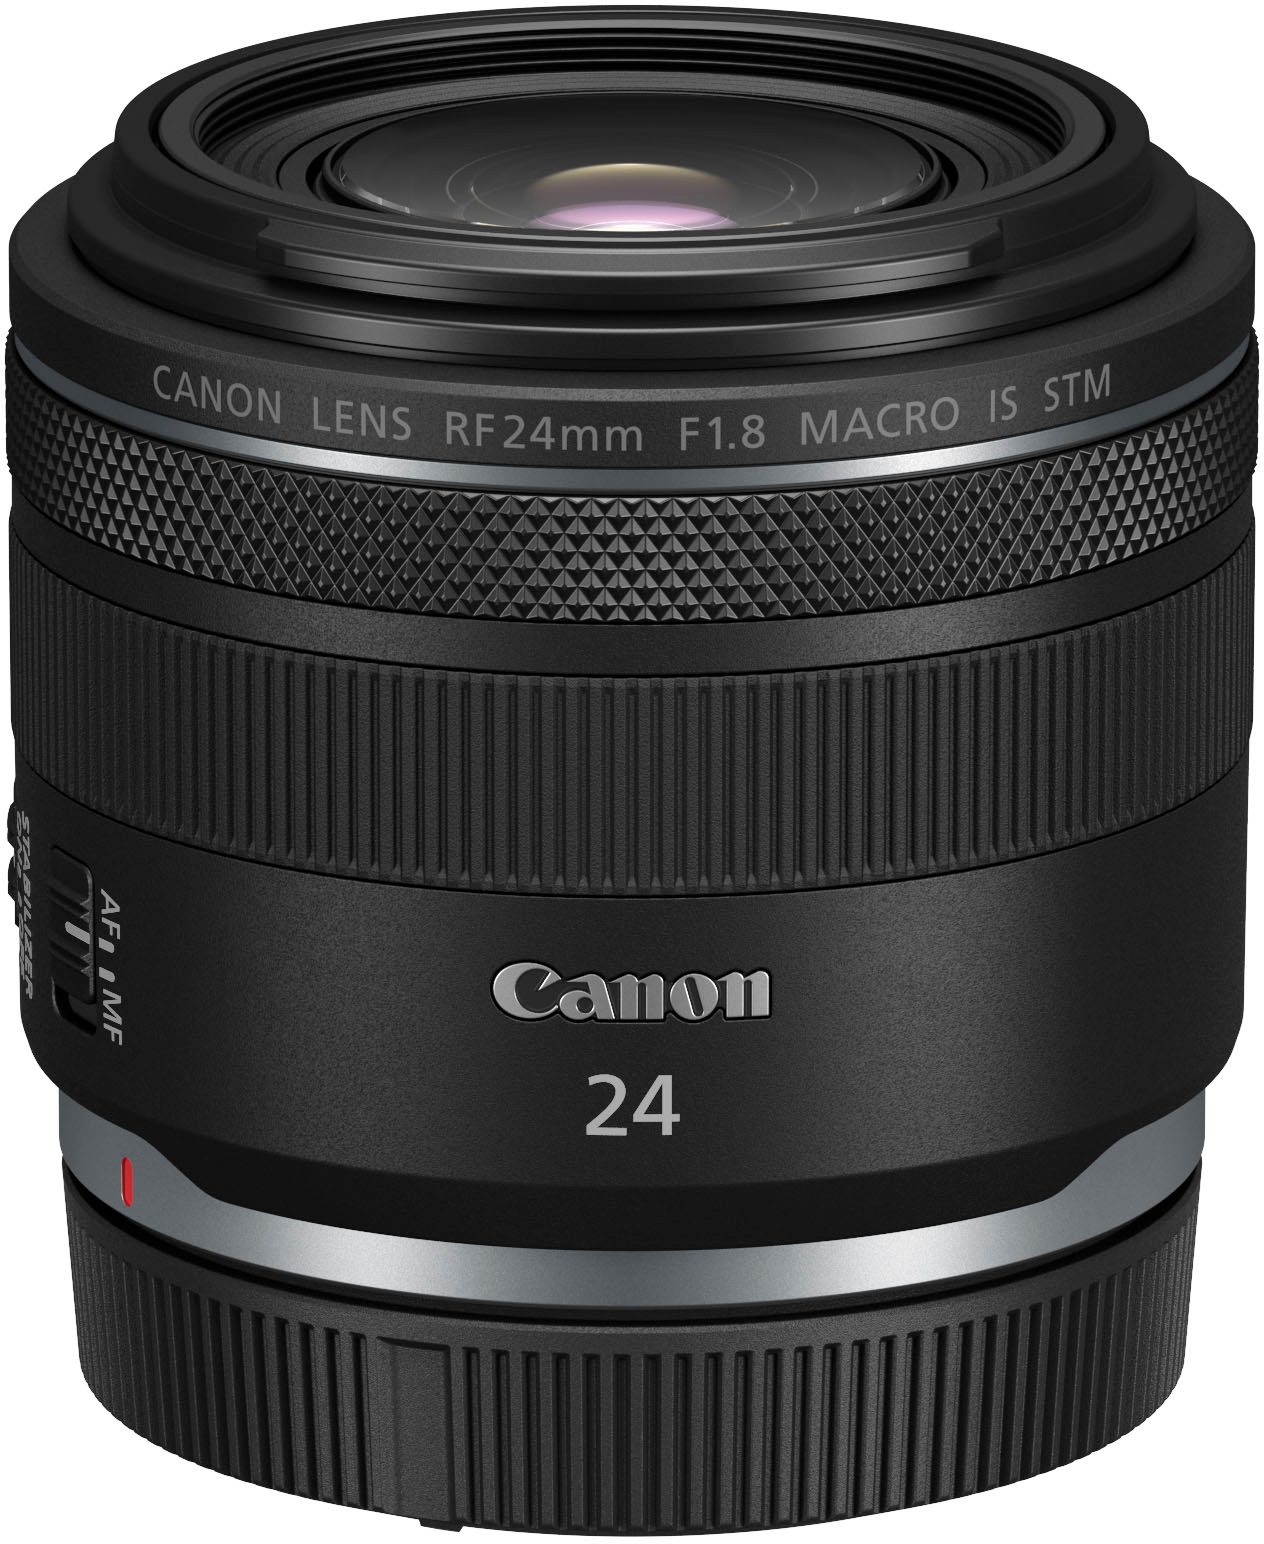 Back View: Canon - RF 24mm f/1.8 MACRO IS STM Wide Angle Prime Lens - Black